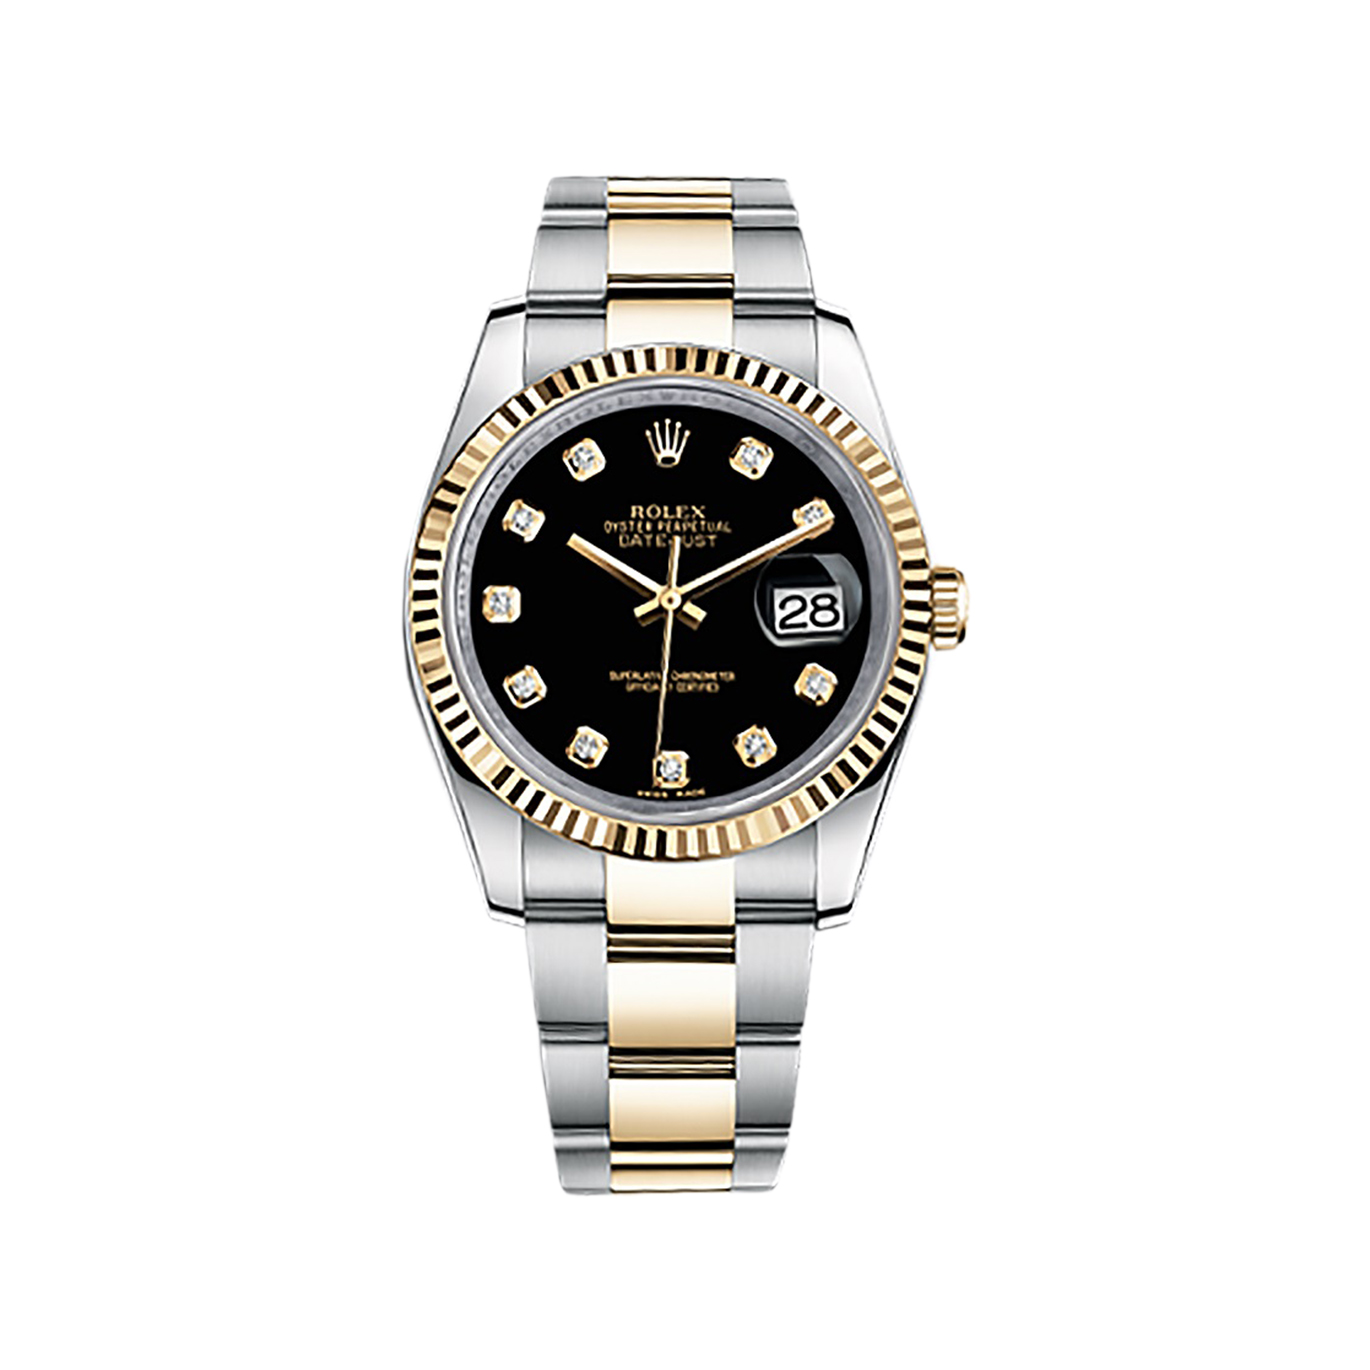 Datejust 36 116233 Gold & Stainless Steel Watch (Black Set with Diamonds) - Click Image to Close